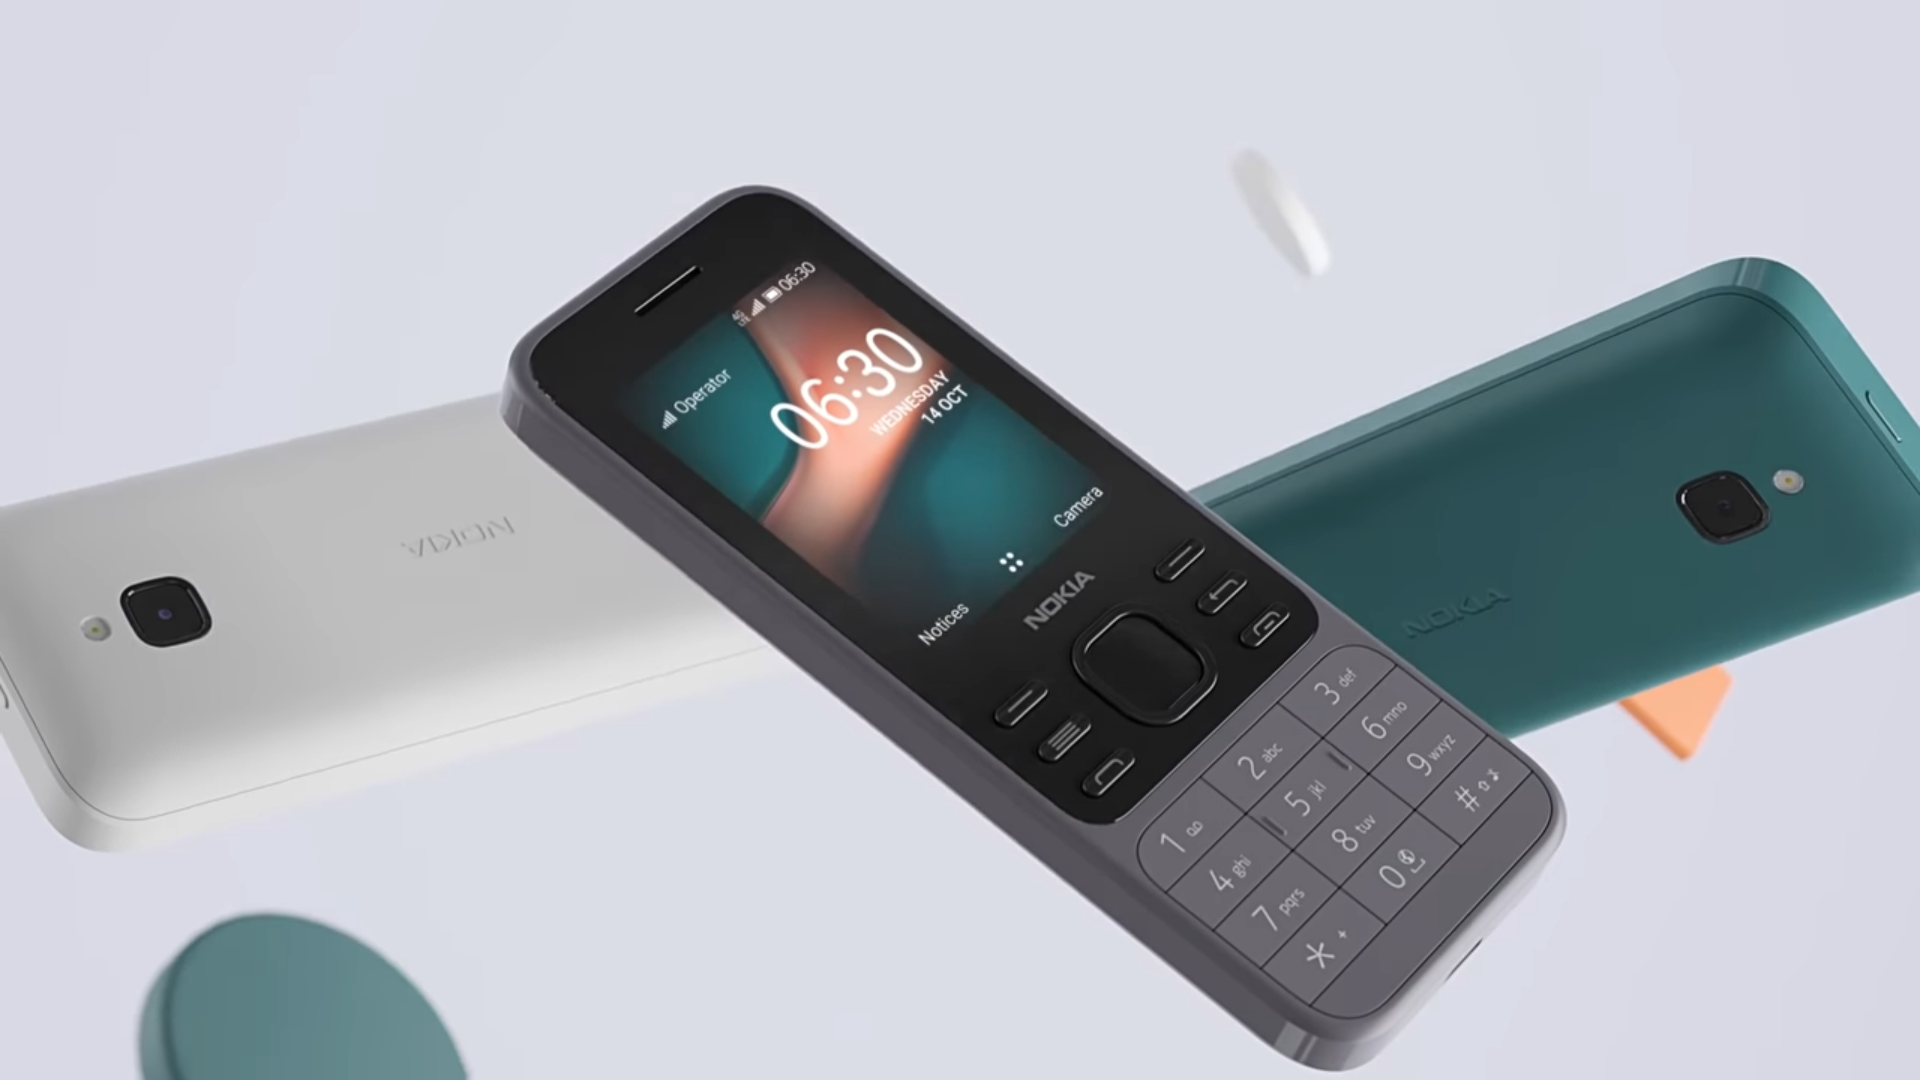 Nokia 6300 4G, Nokia 8000 4G To Give Classic Phones A Modern Spin -  SlashGear